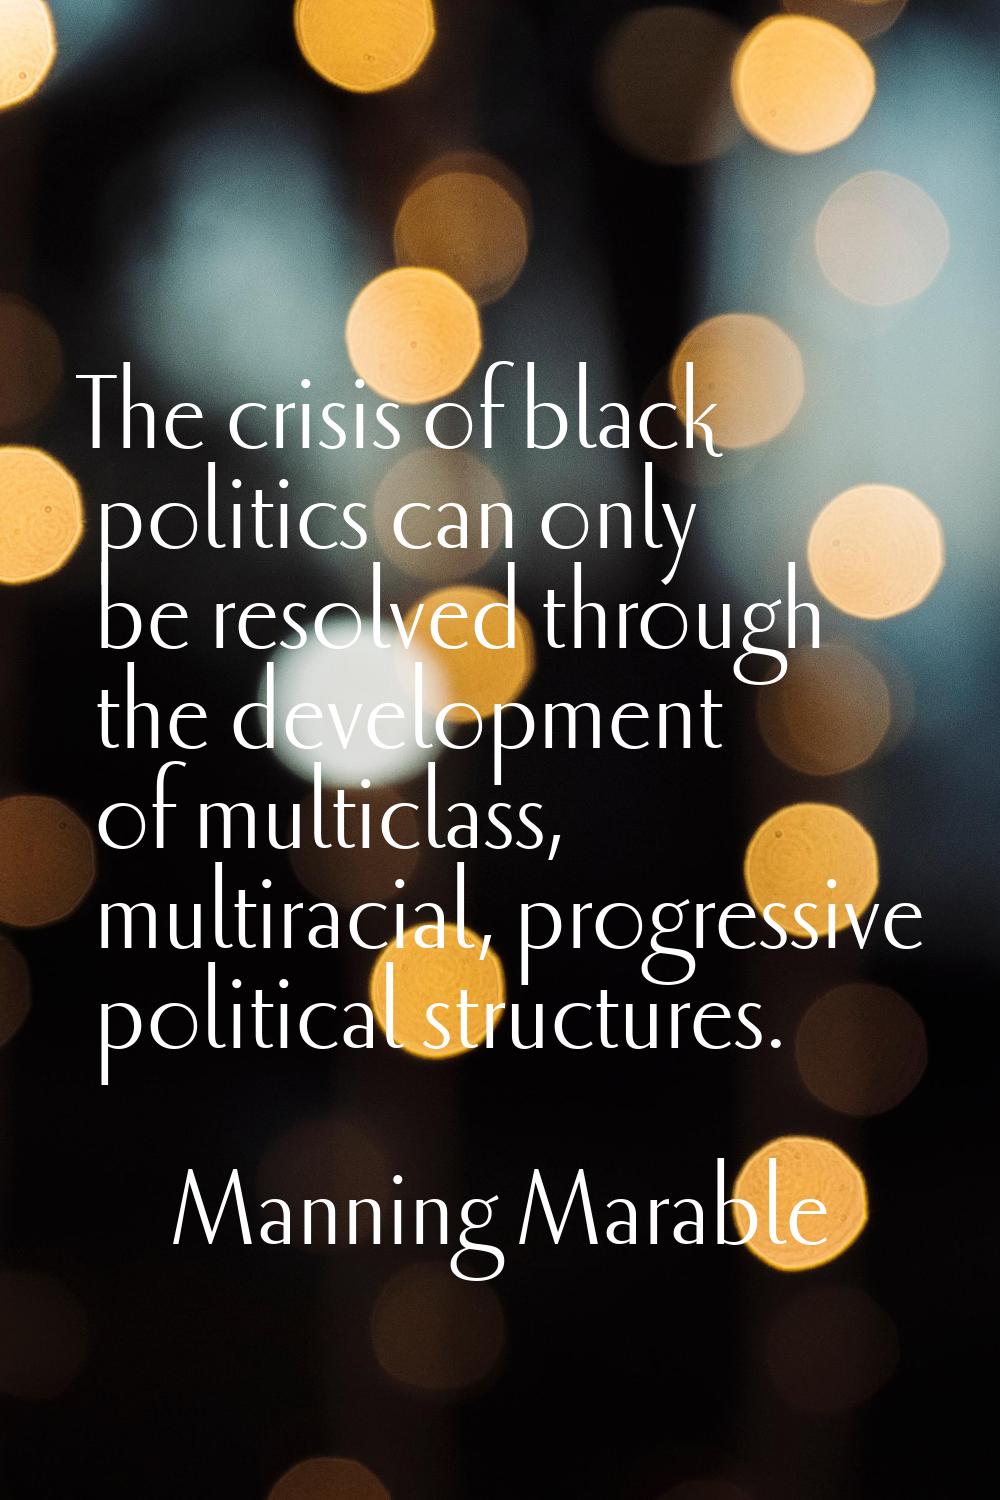 The crisis of black politics can only be resolved through the development of multiclass, multiracia